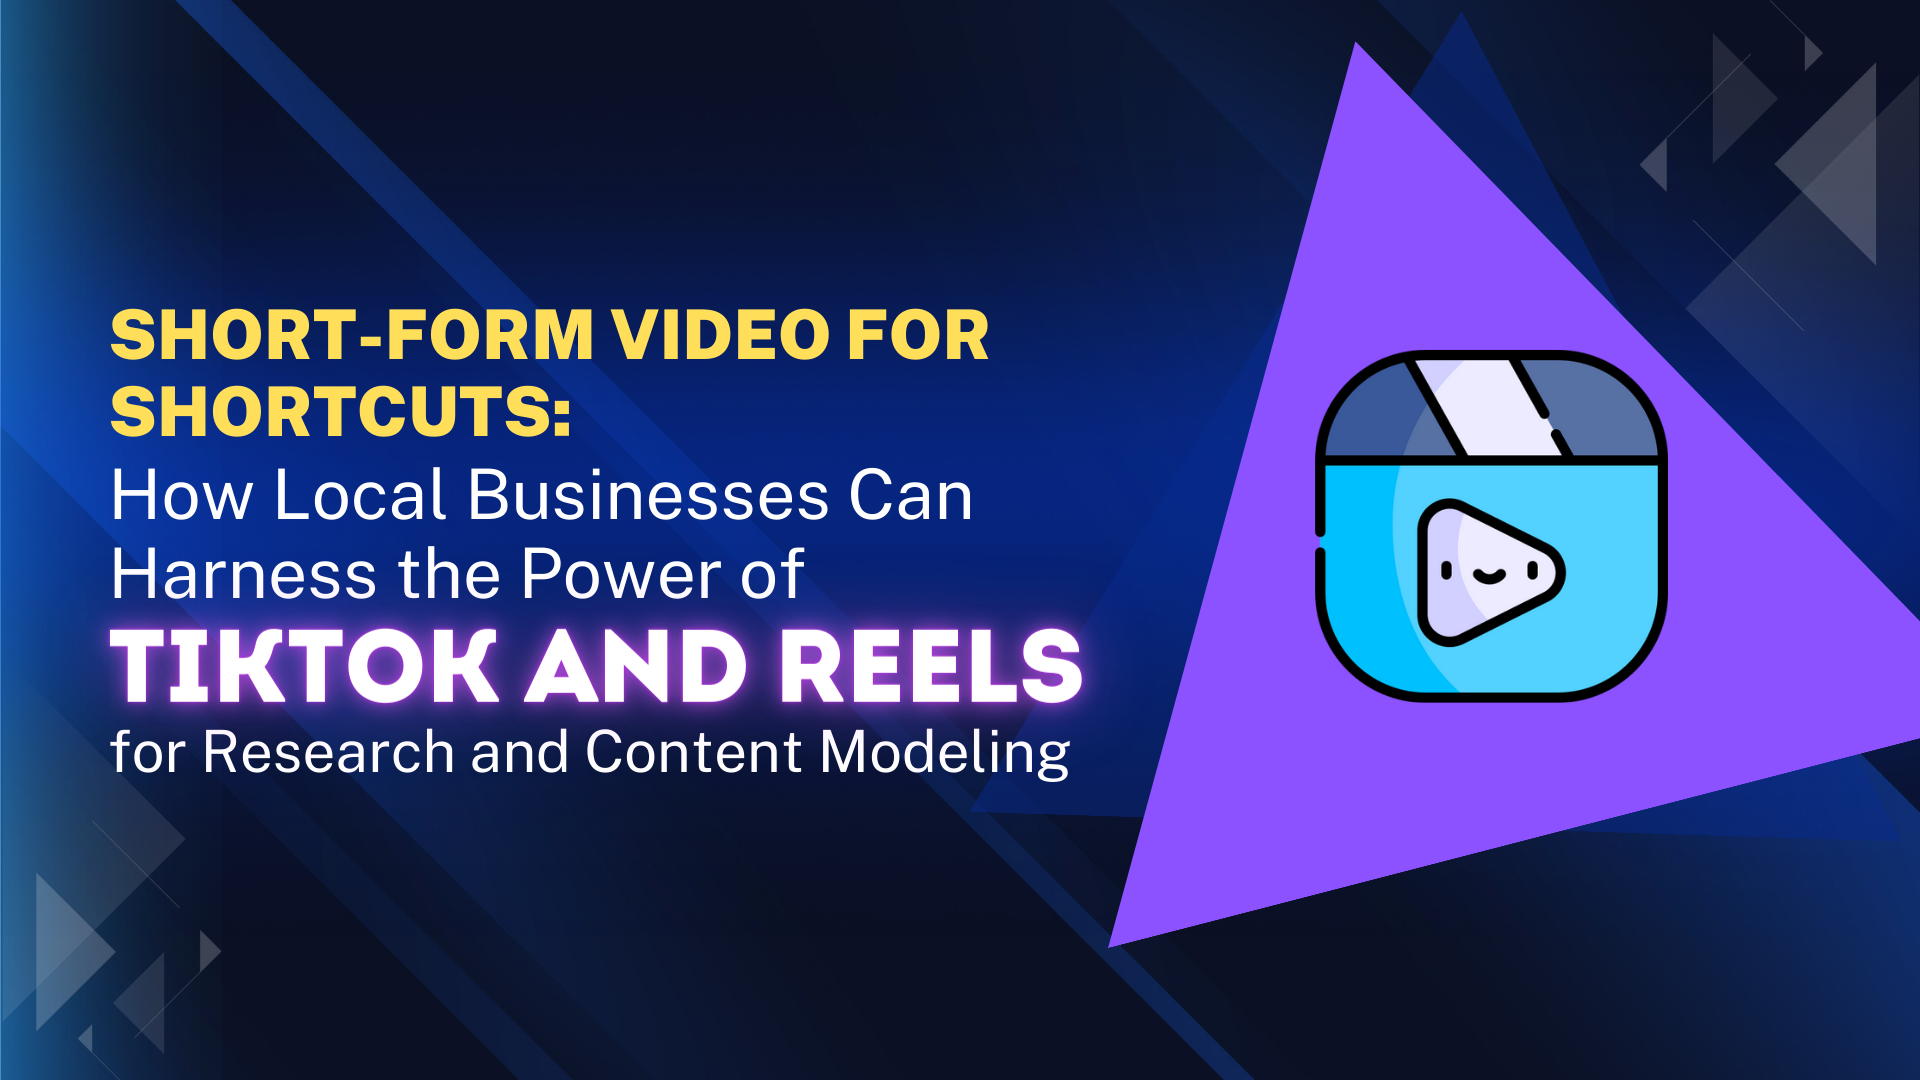 How Local Businesses Can Harness the Power of TikTok  and Reels for Research and Content Modeling